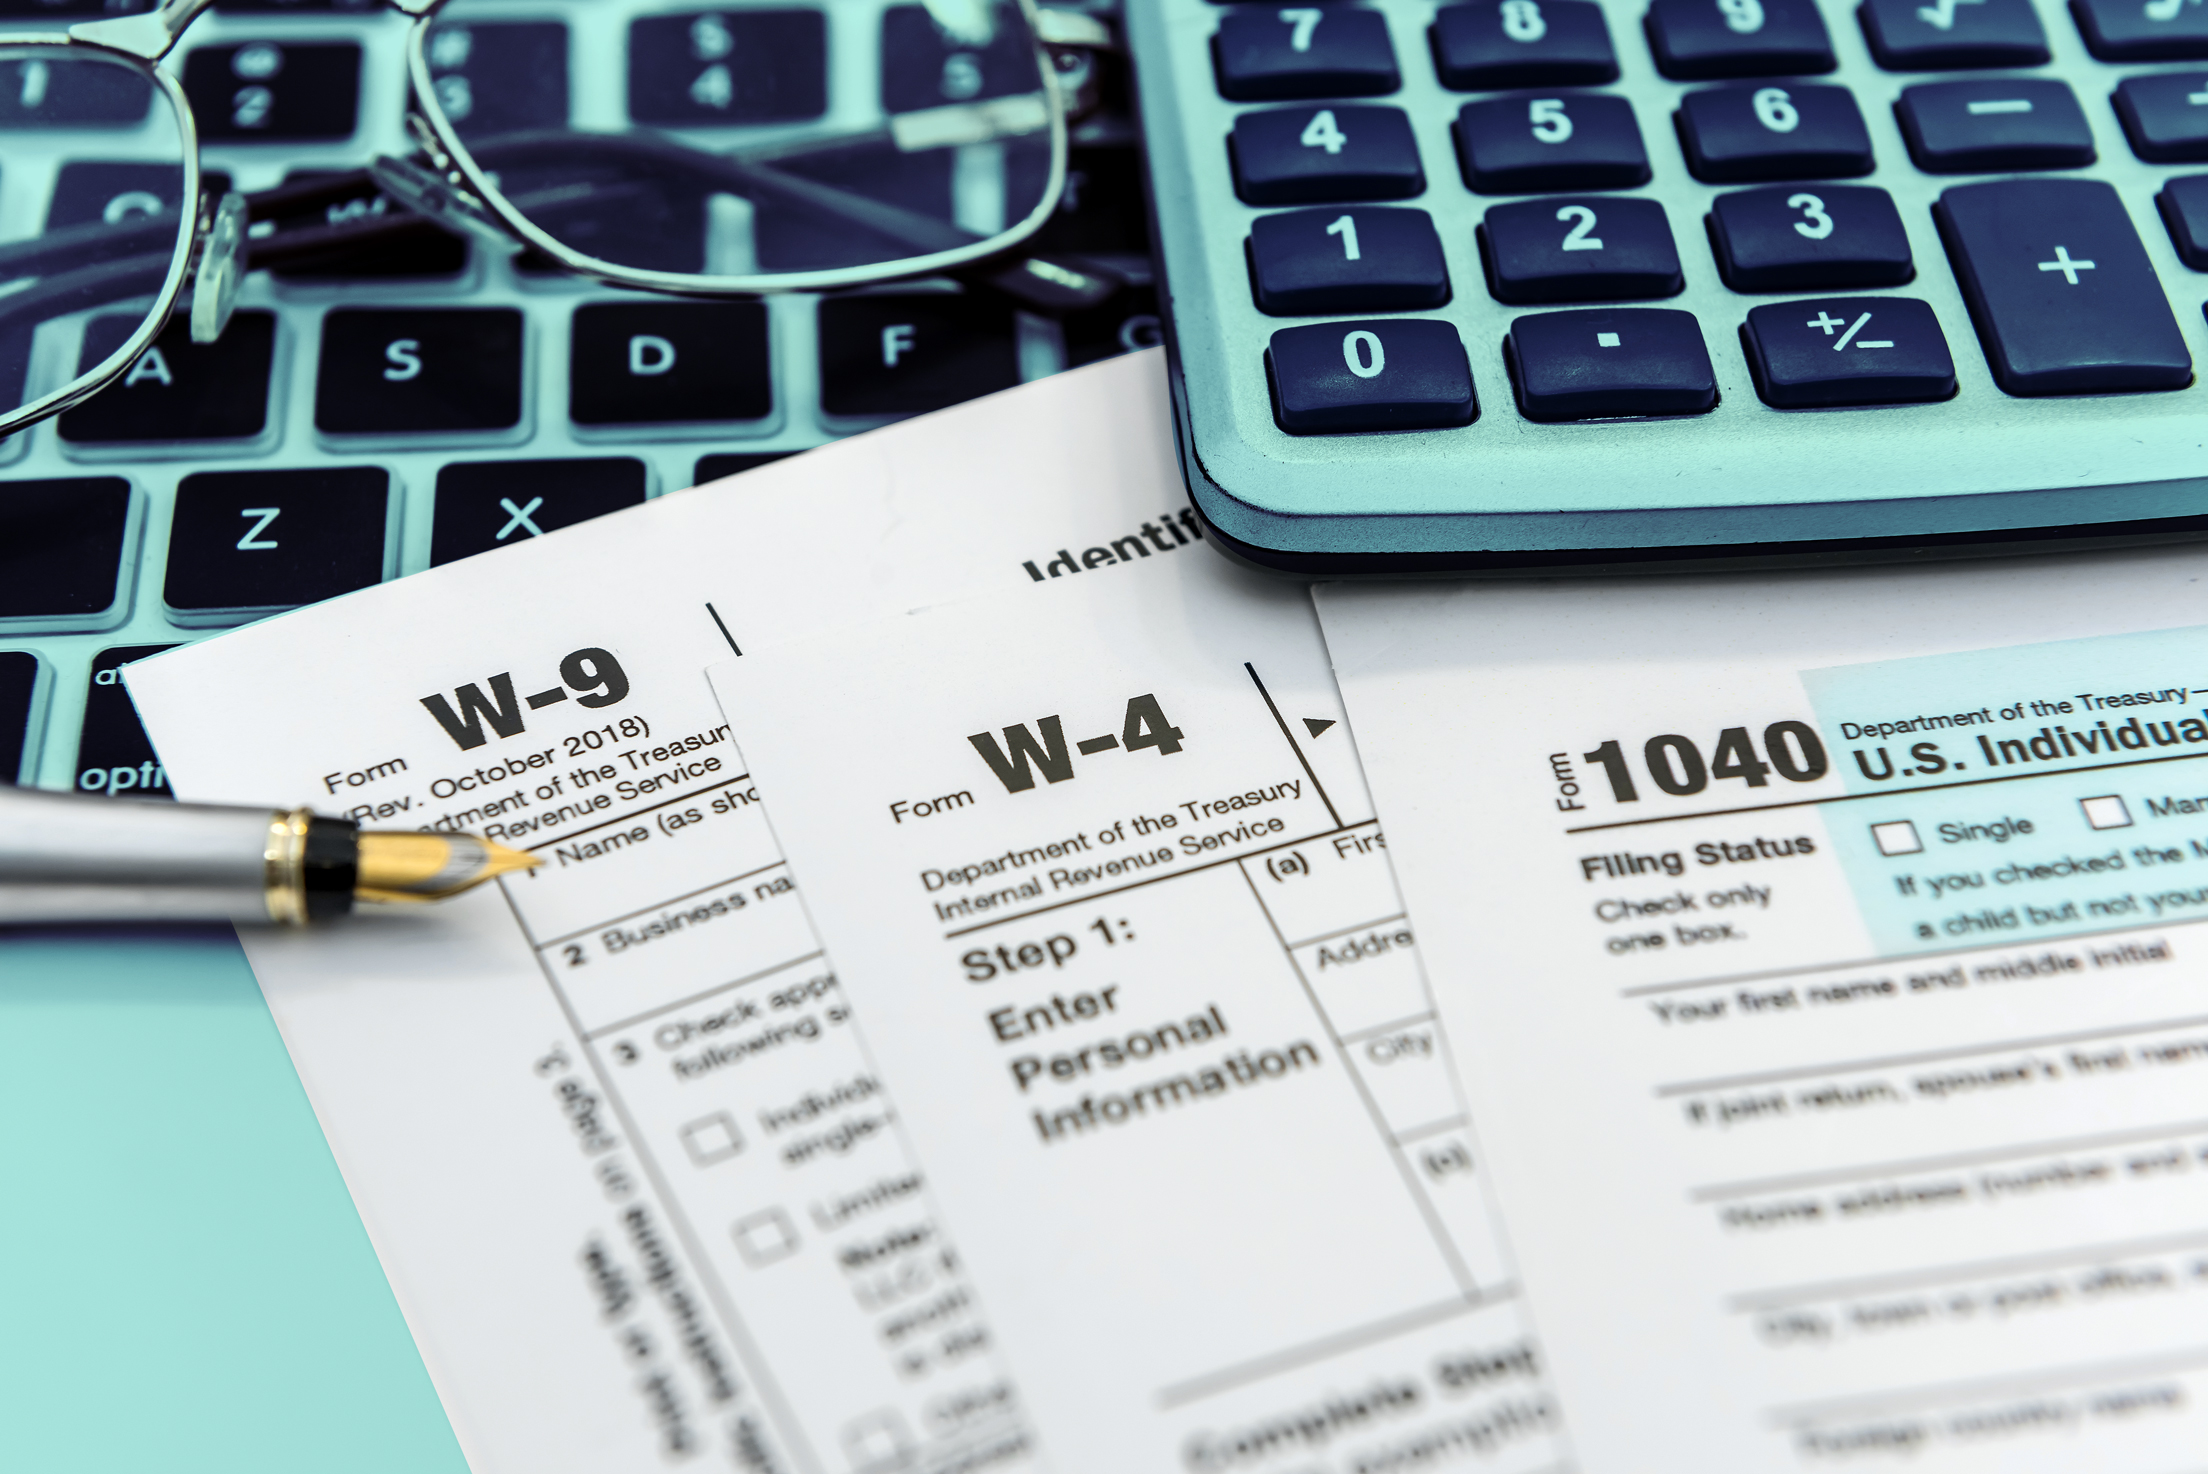 What is FICA Tax? - Optima Tax Relief